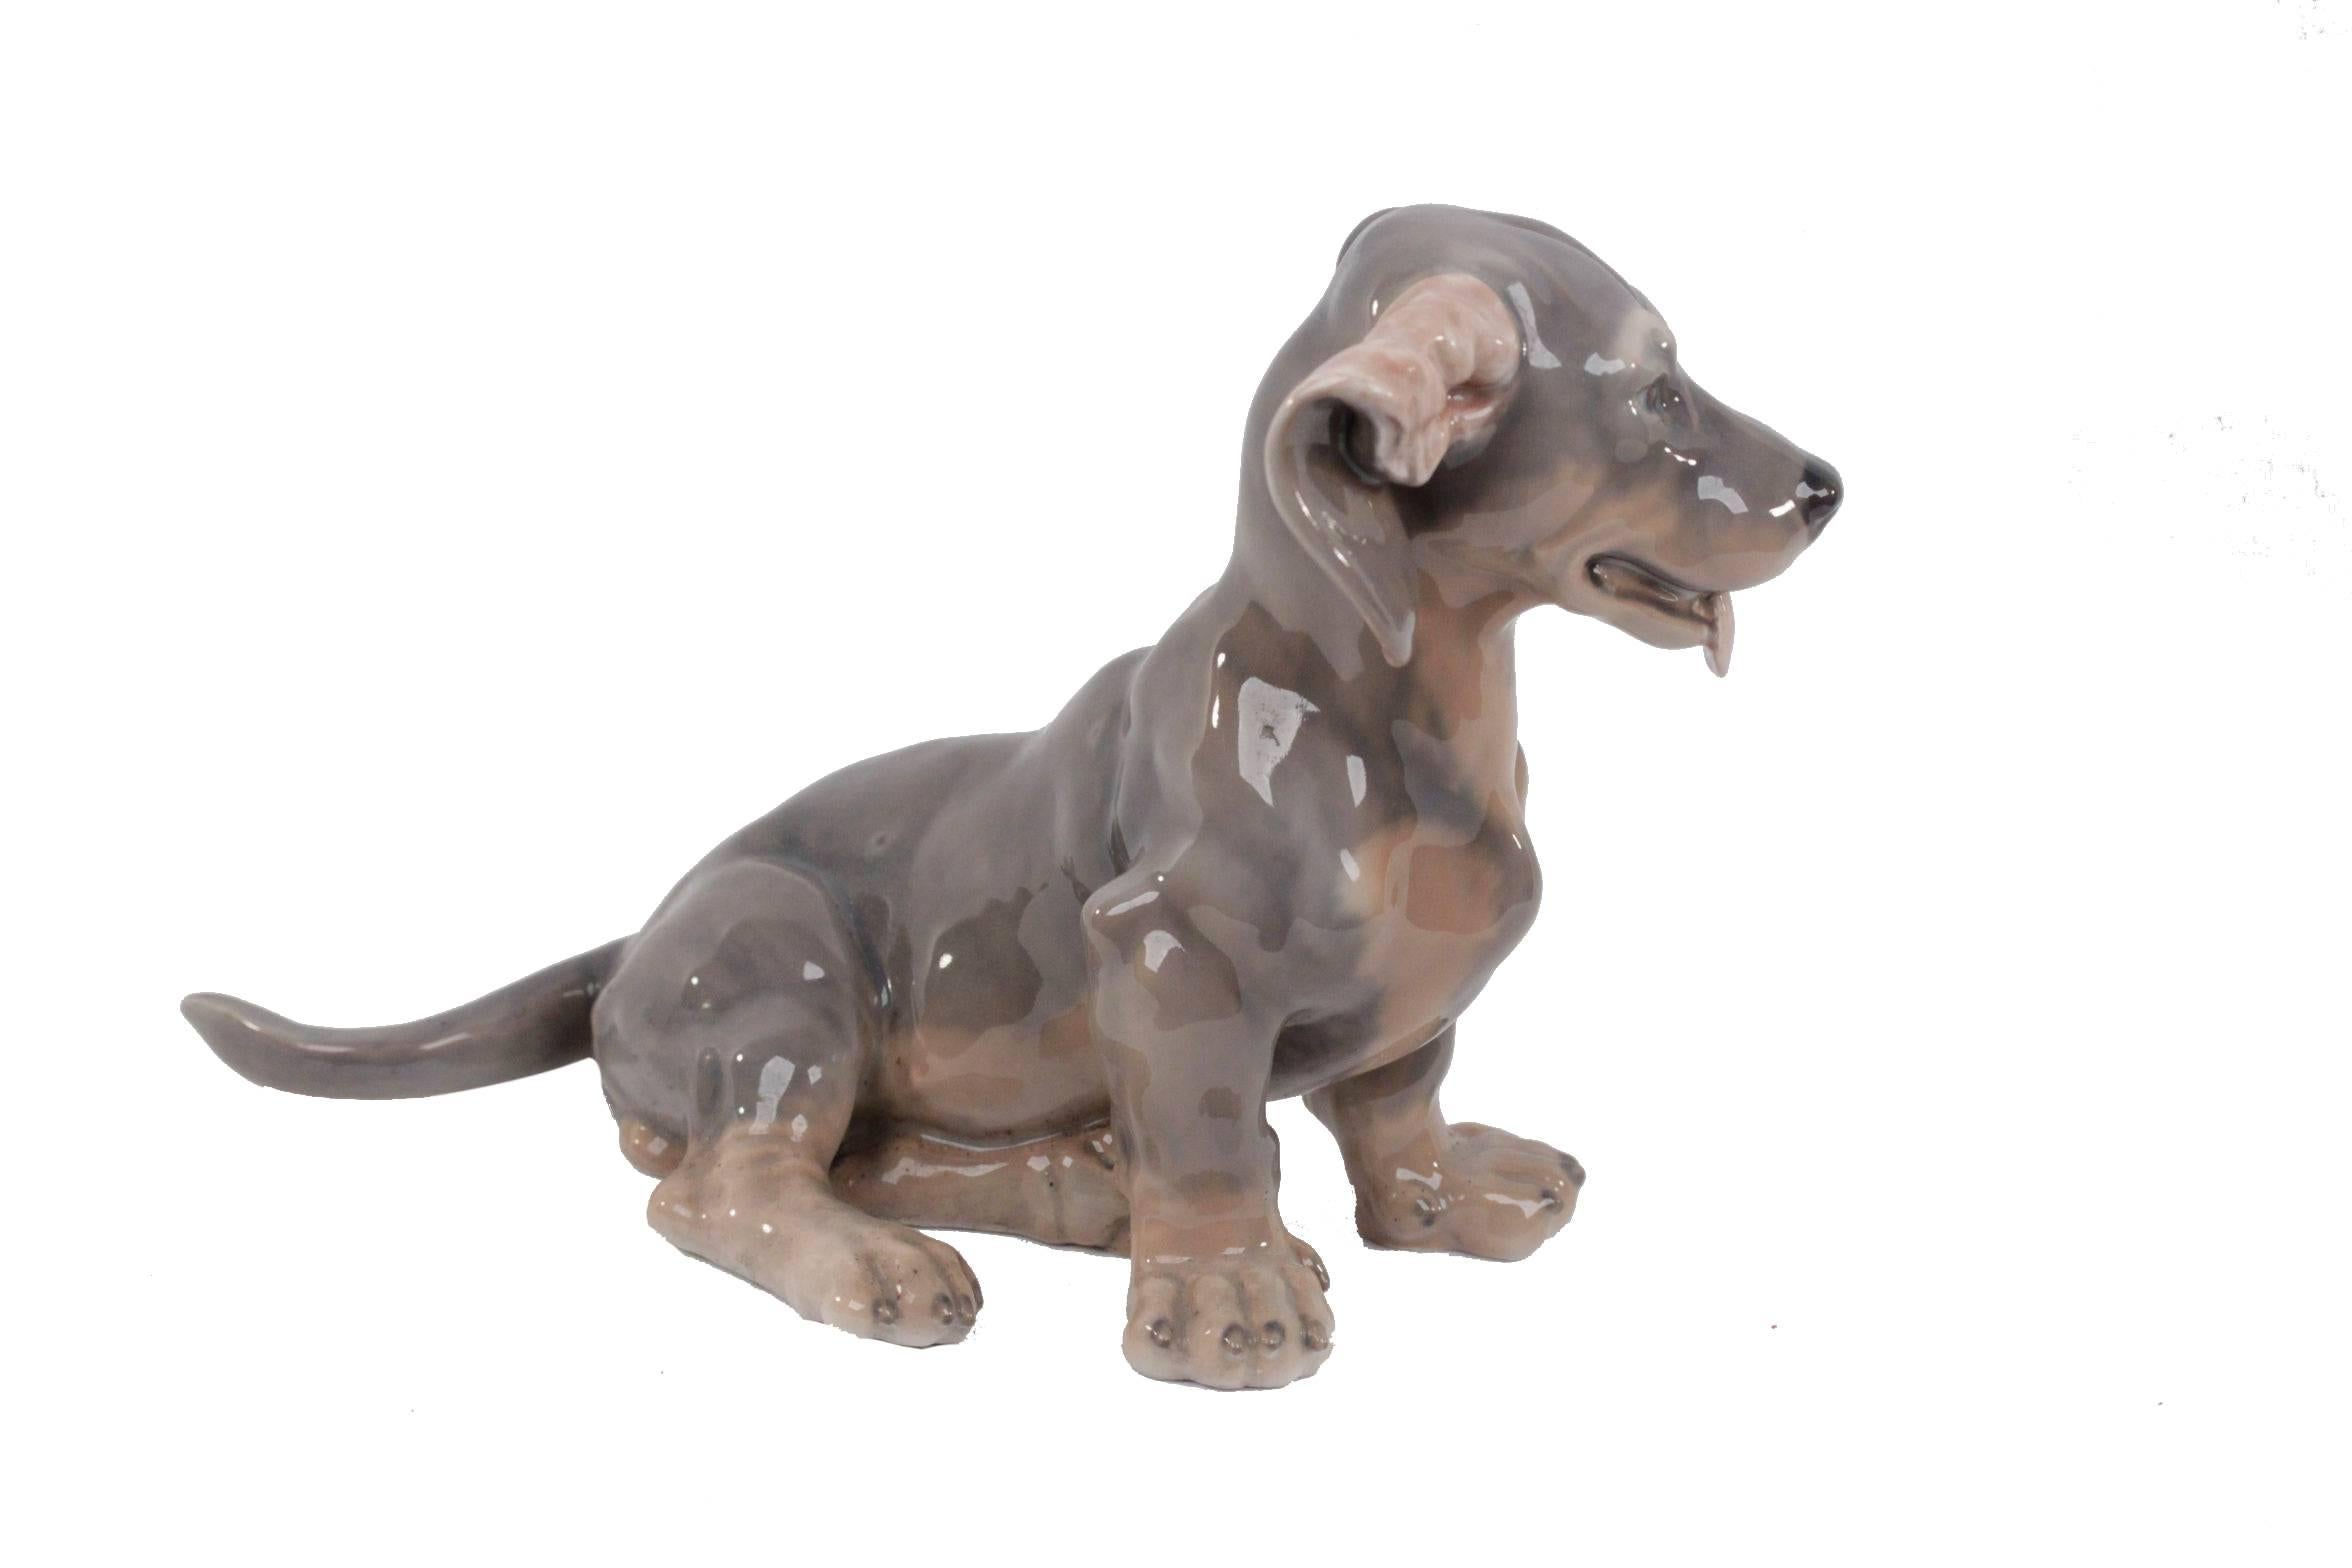  - Royal Copenhagen Figure of a Dachshund Dog figurine, seated with tongue out
- Polychrome hand-painted porcelain figurine
- Model: #856
- Highly realistic details
- Designed by Lauritz Jensen
- Approx. Height: 7 1/2 inches - 19 cm
- Approx.